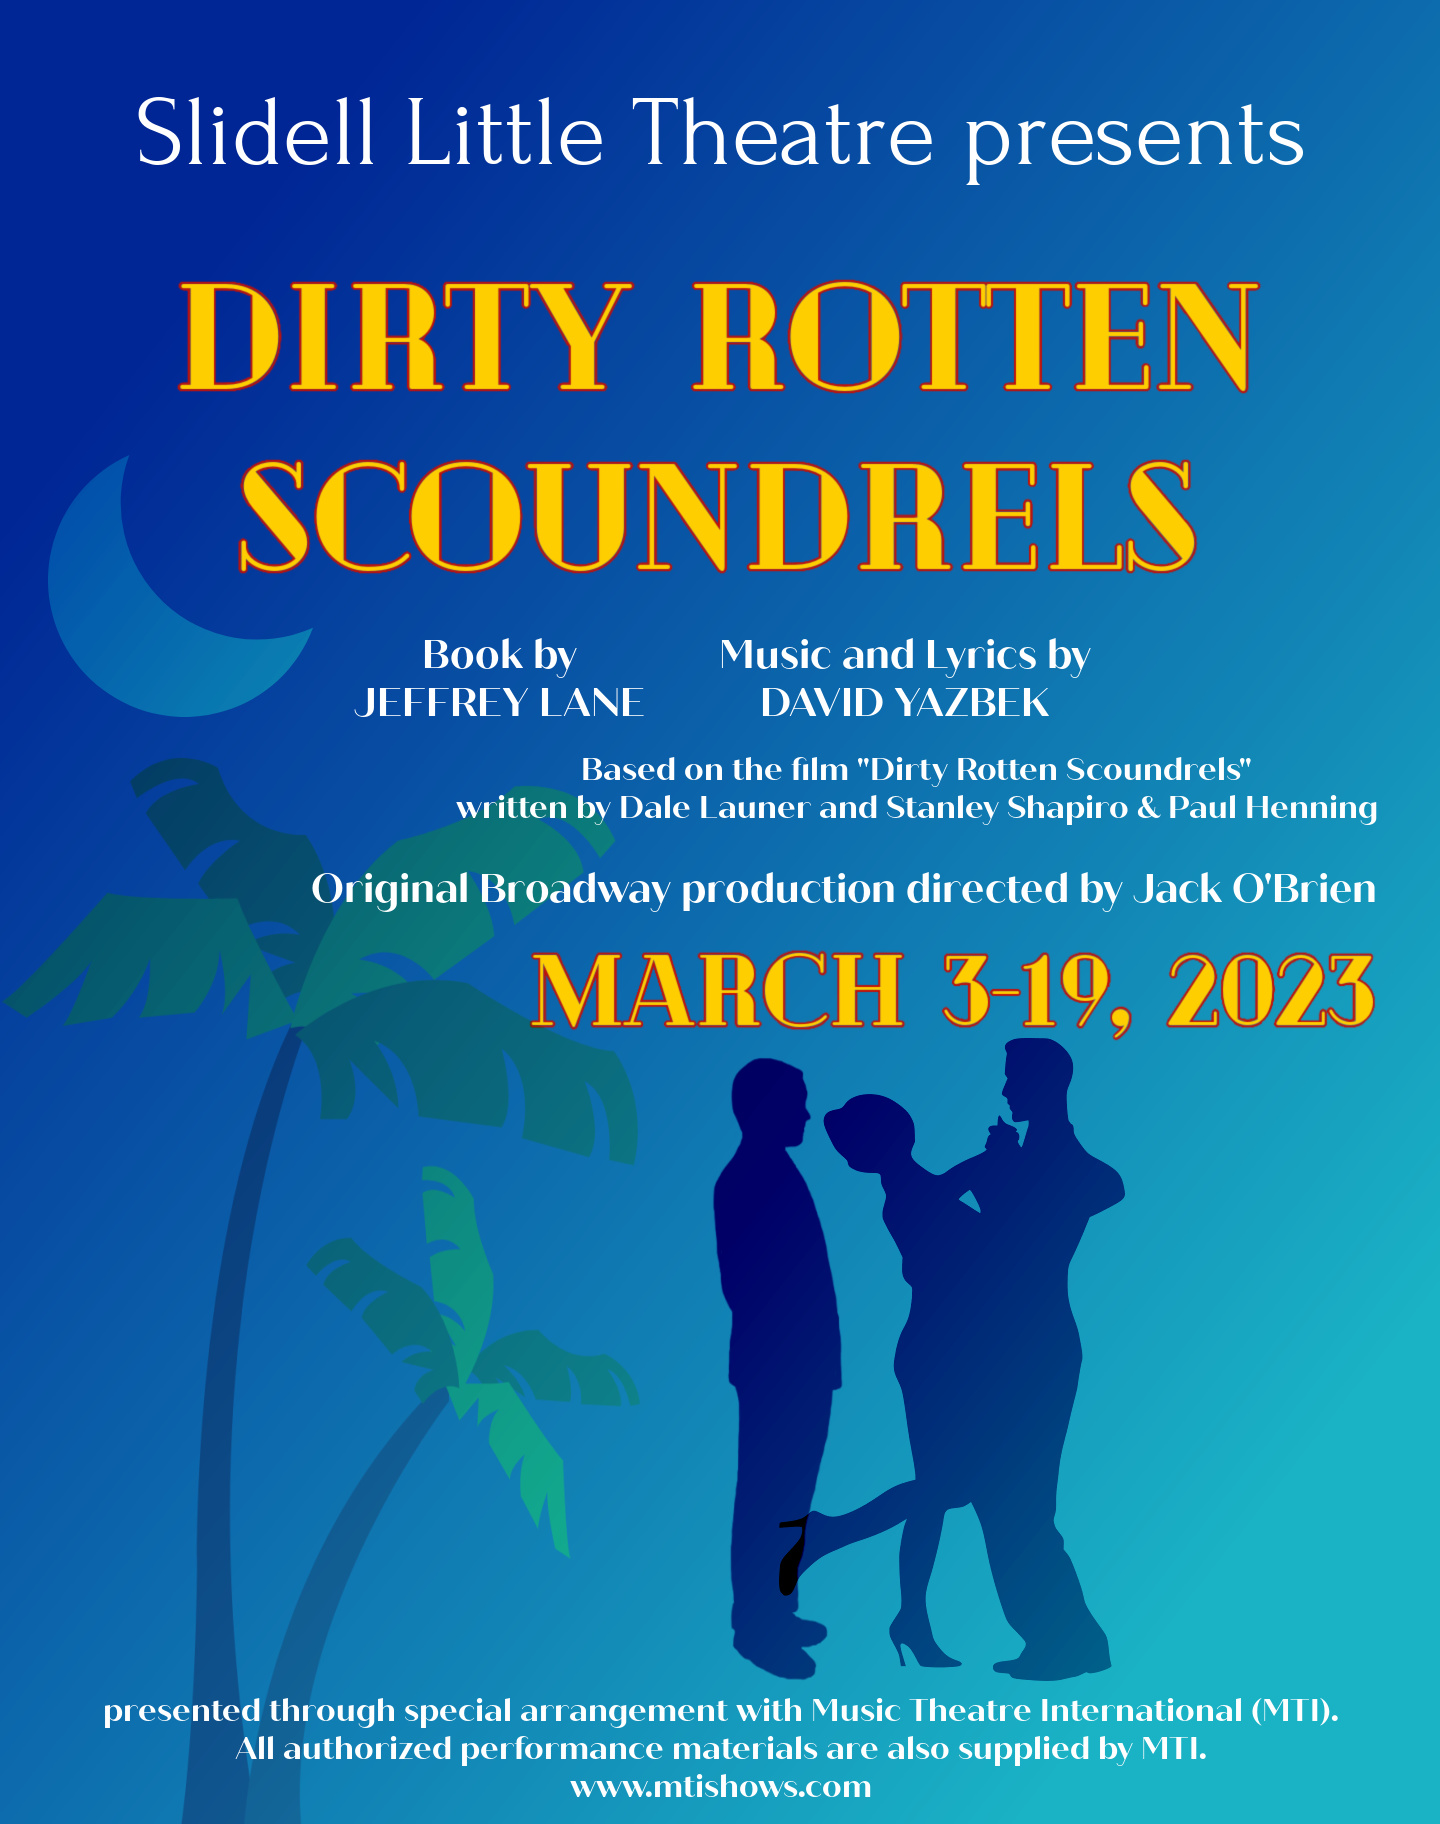 Slidell Little Theatre presents Dirty Rotten Scoundrels
March 3-19, 2023